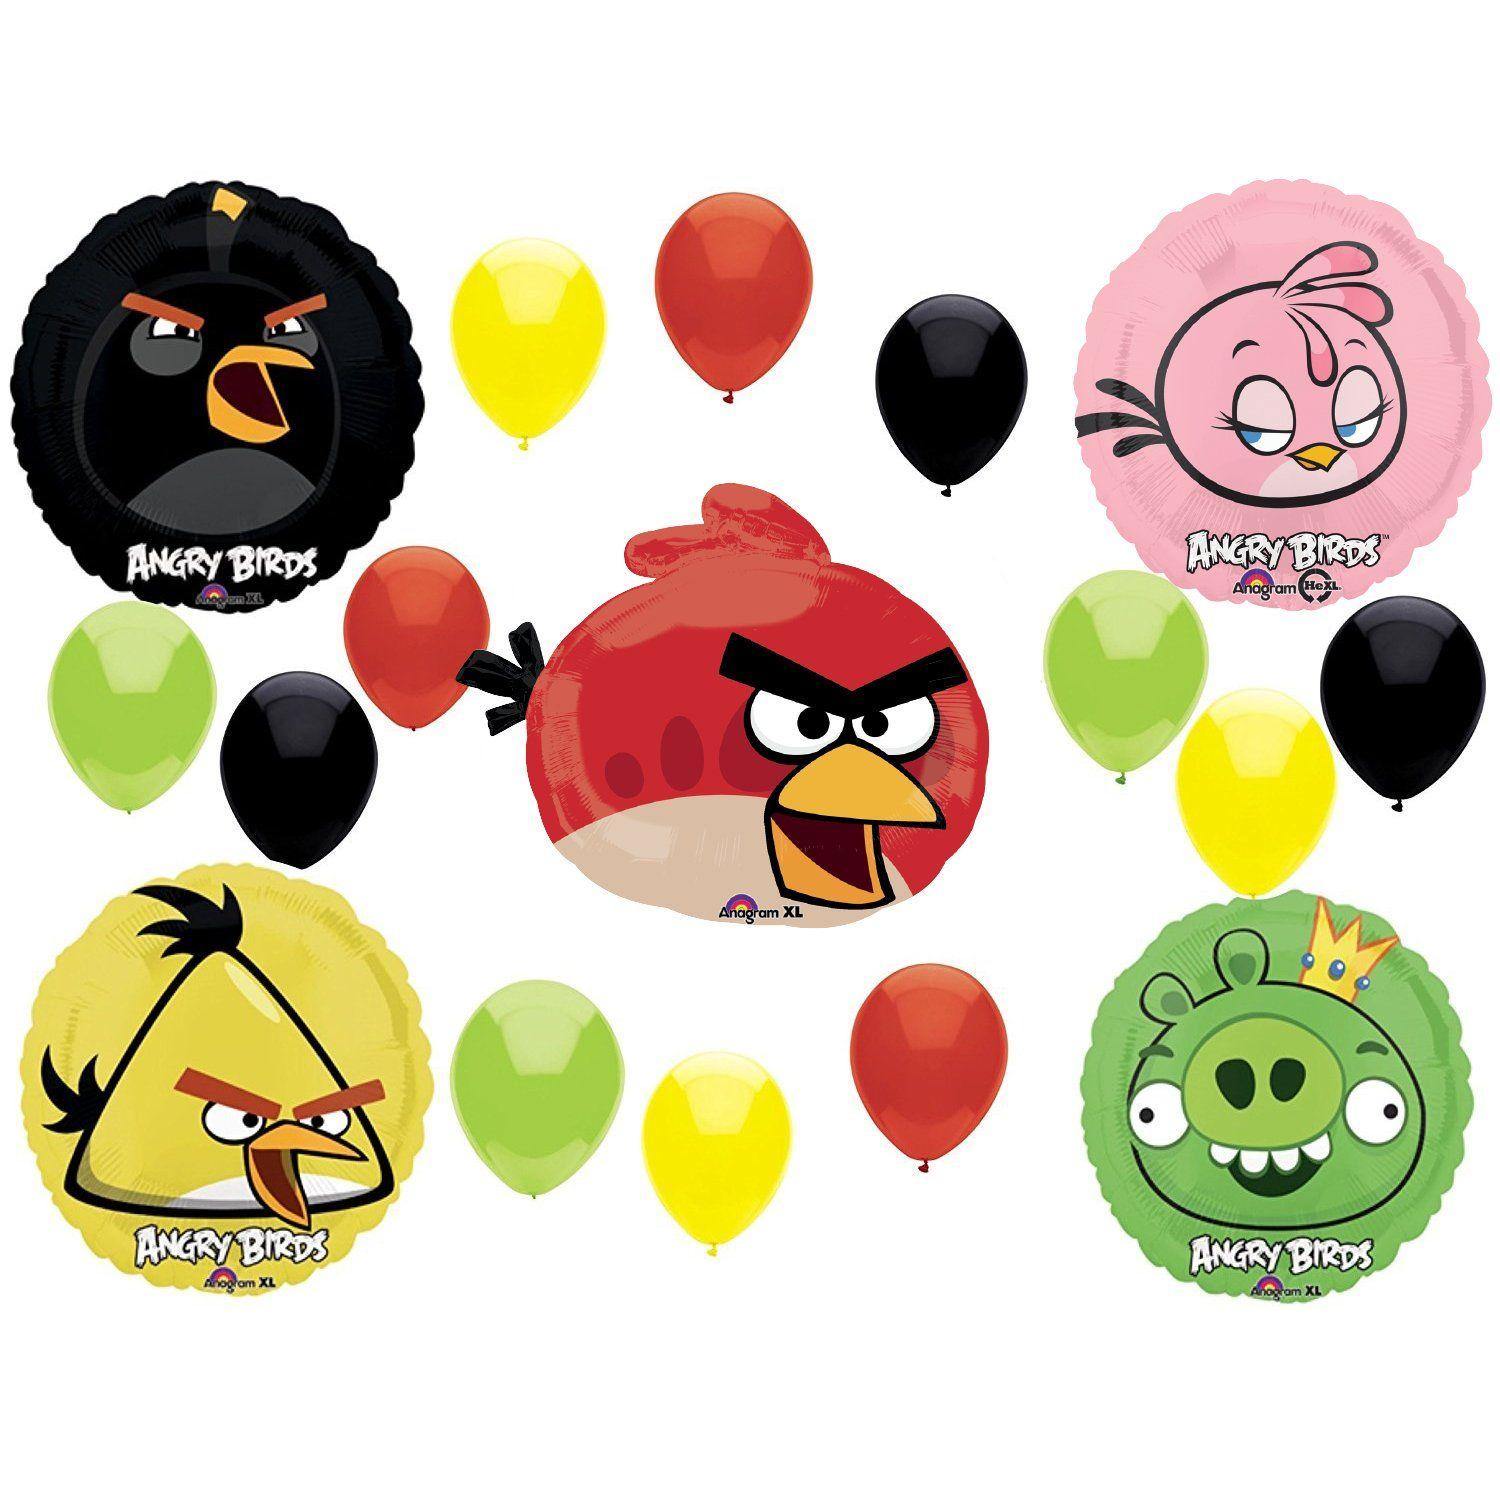 Green and Red Bird Shop Logo - Angry Birds Birthday Party Supplies and Red Bird Balloon